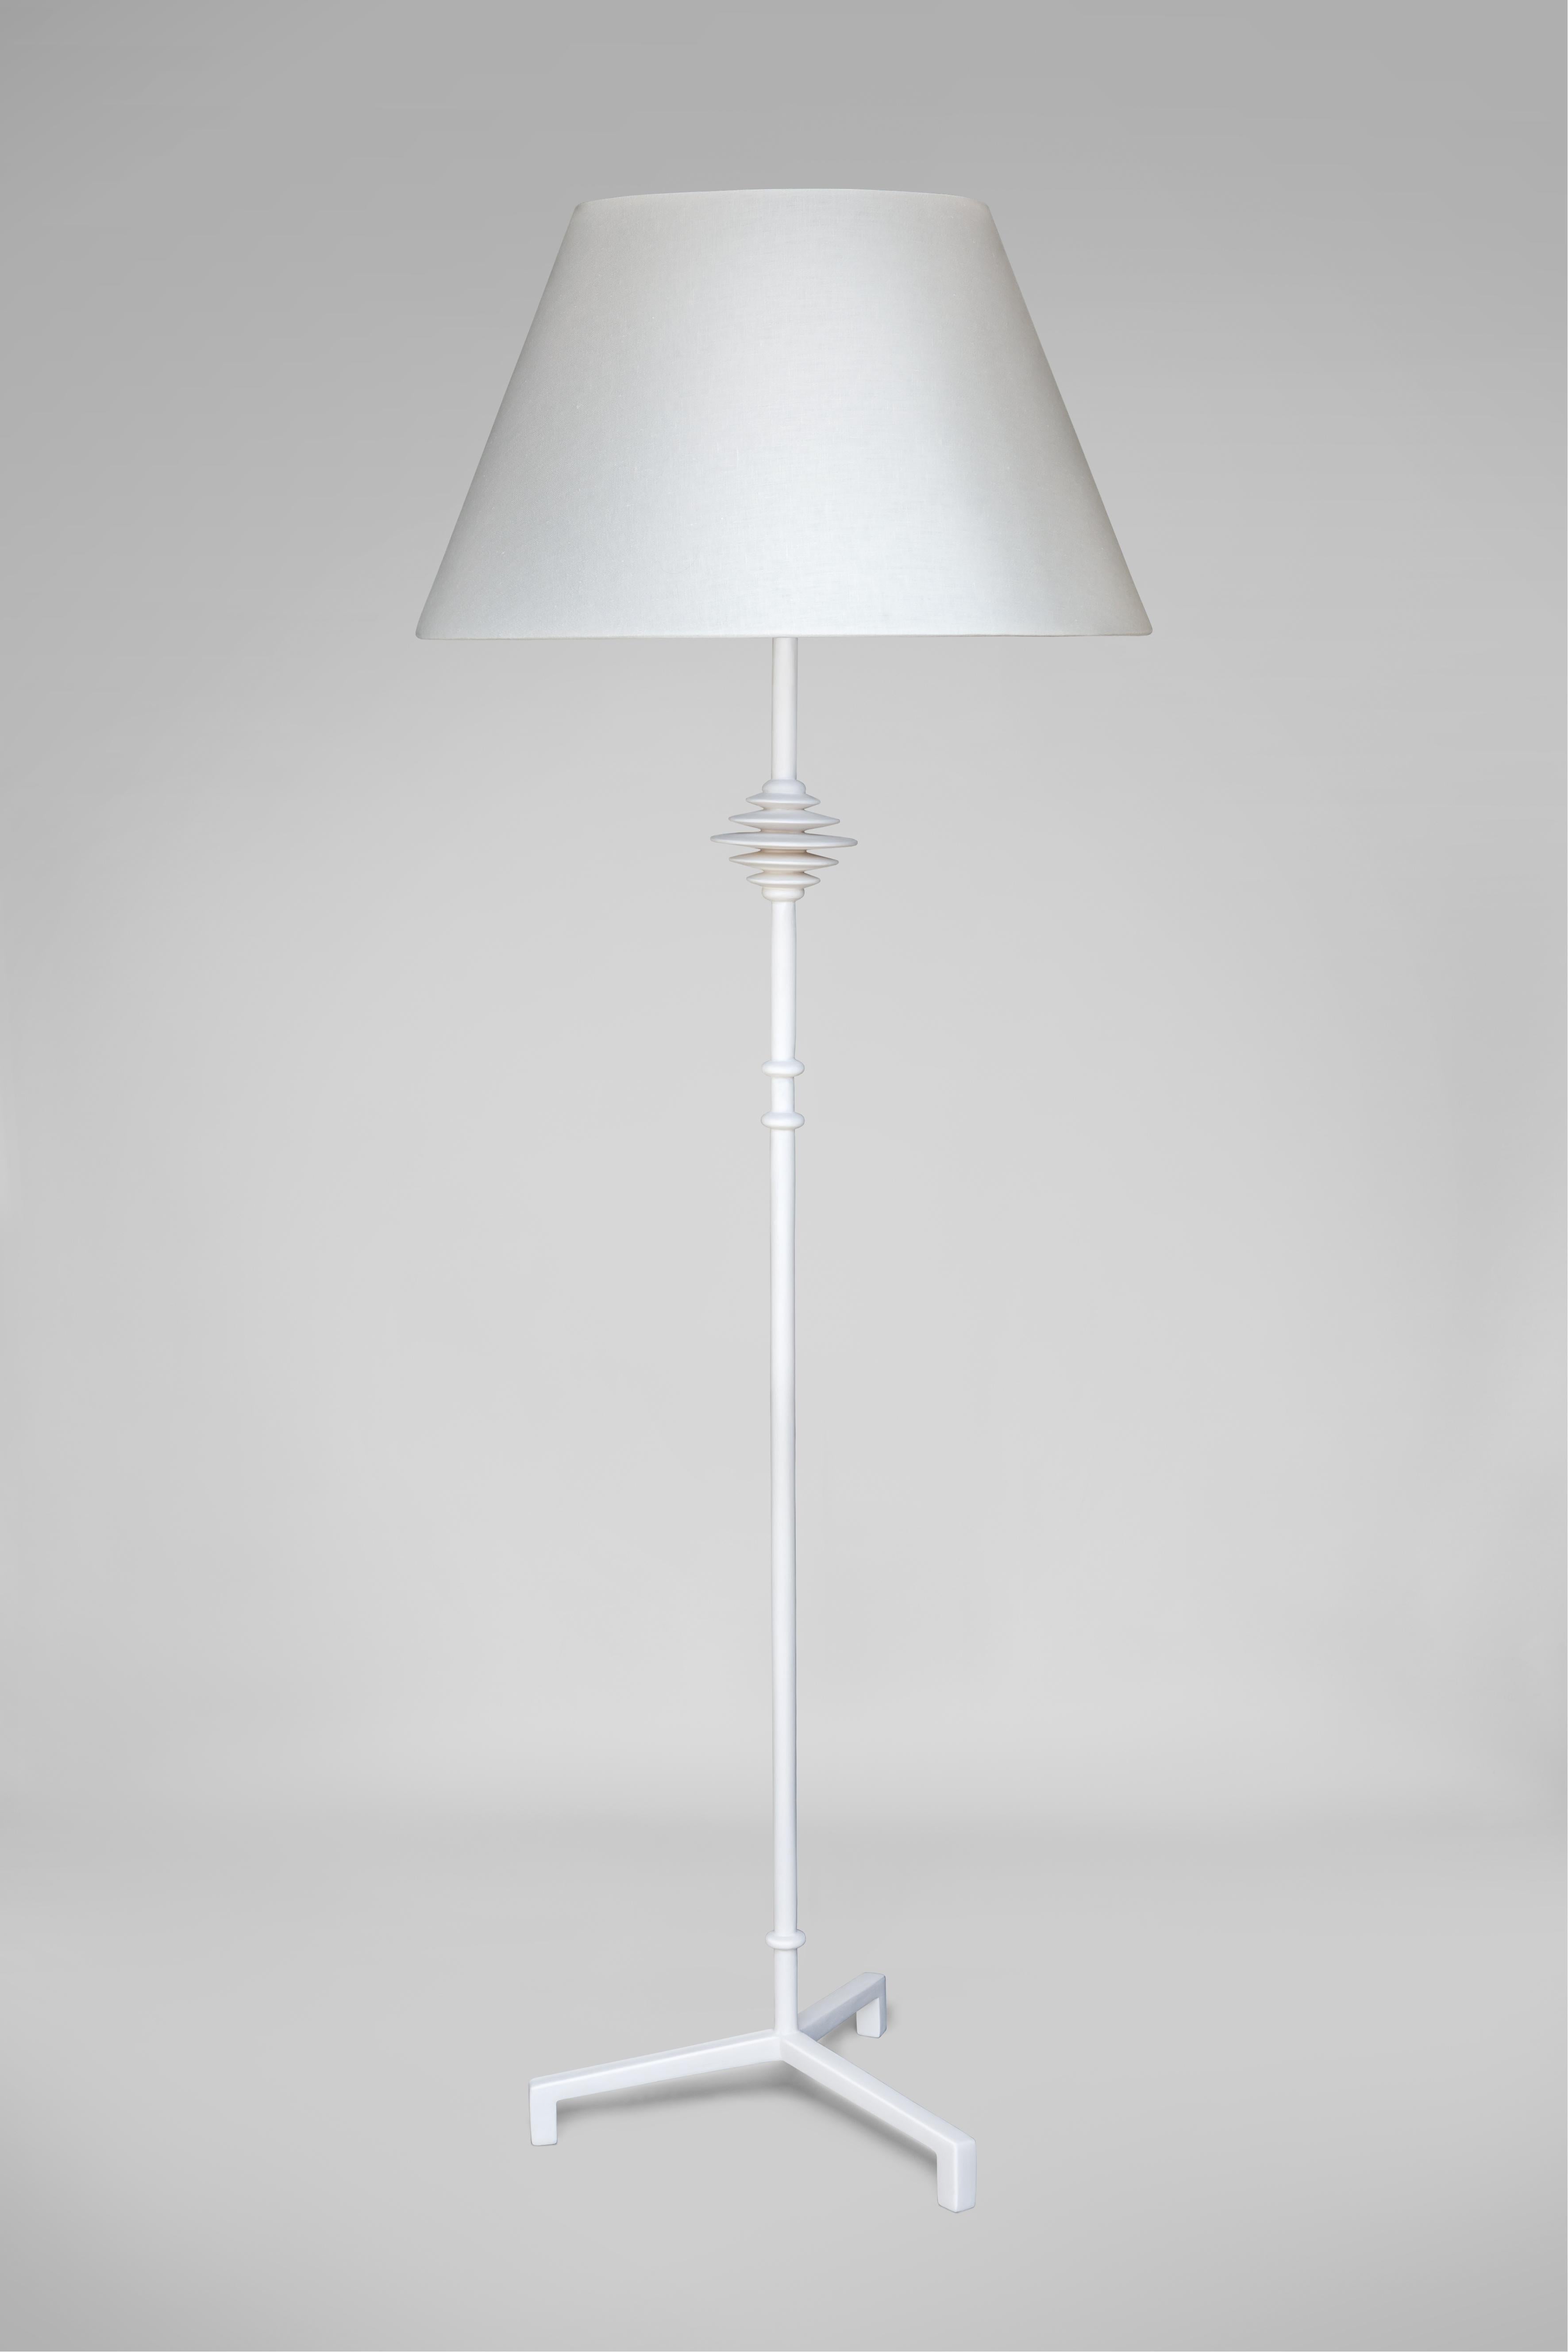 Floor lamp in hand sculpted plaster on metal armature, in the Giacometti Manner.

Lampshade  not included
Recommended Lampshade dimensions: 
Ø 31 top x Ø 55 bottom x H 34 cm / Ø 12,20″ top x Ø 21,65″ bottom x H 13,38″

LAMP 1 x Candelabra bulb / 1 x